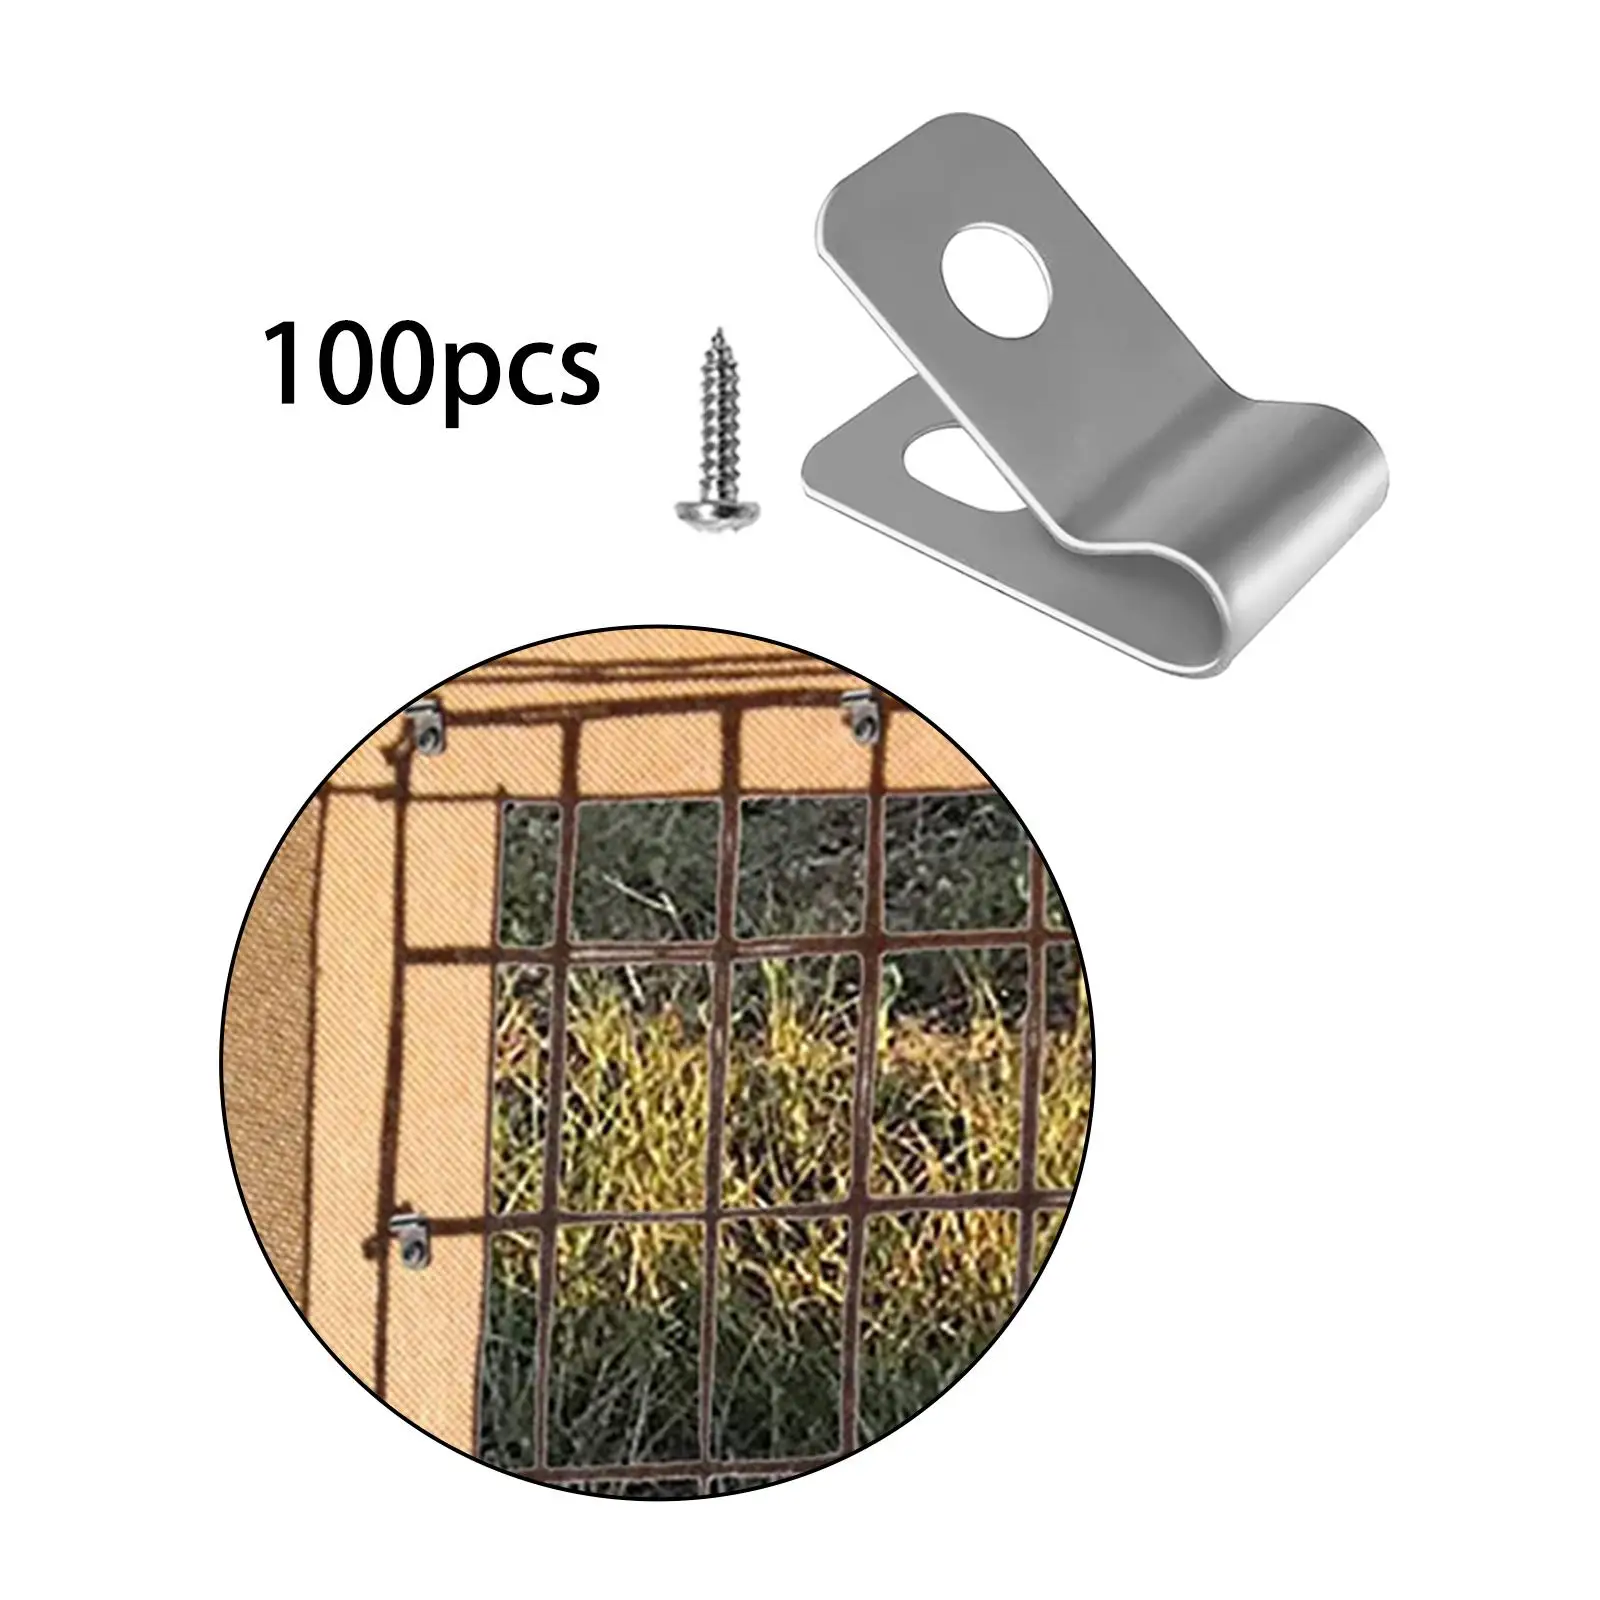 100Pcs Wire Fence Clips with Tightening Screws Fencing Mounting Clips for Vinyl, Metal, Wood Fence Lightweight Multifunctional